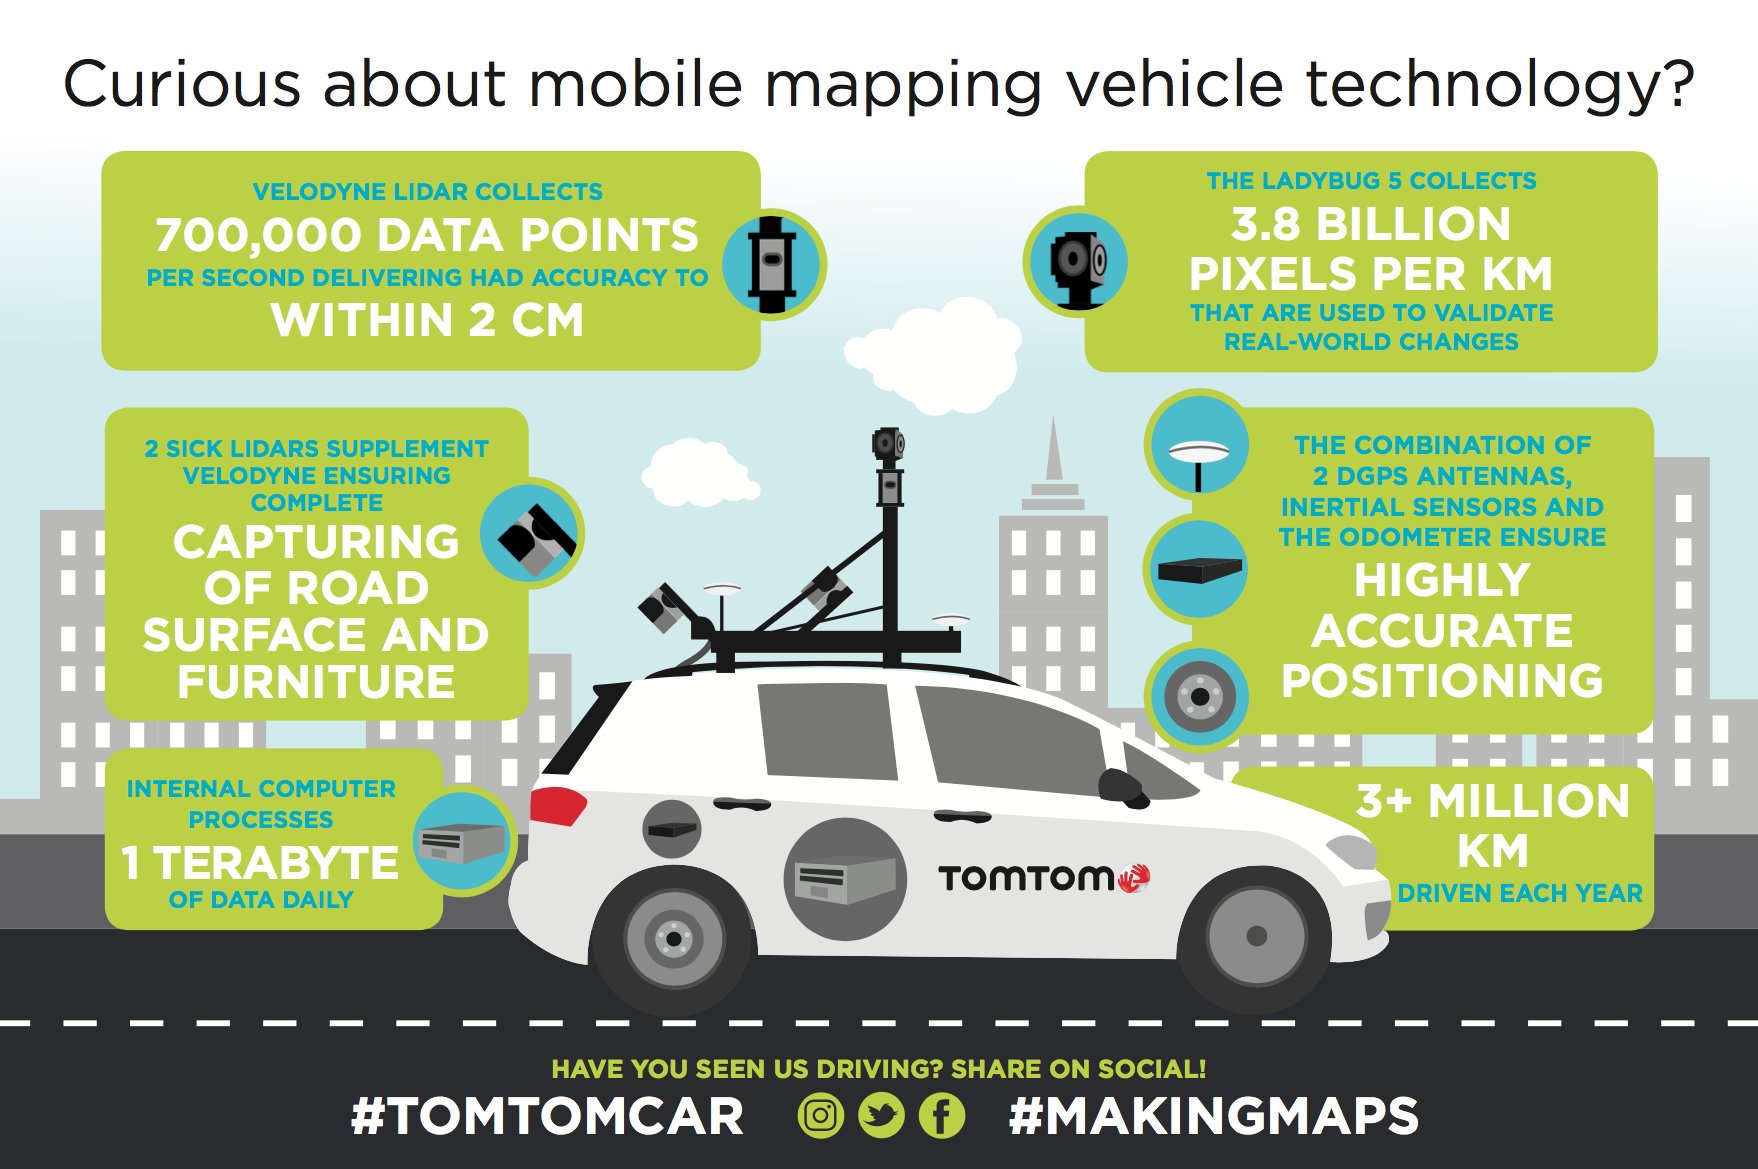 TomTom on Twitter: "#DidYouKnow the collects 700K data points per second? All this while the ladybug on top snaps 3.8 billion pixels per Km! #HDMap https://t.co/9rAUKxaRYy" / Twitter